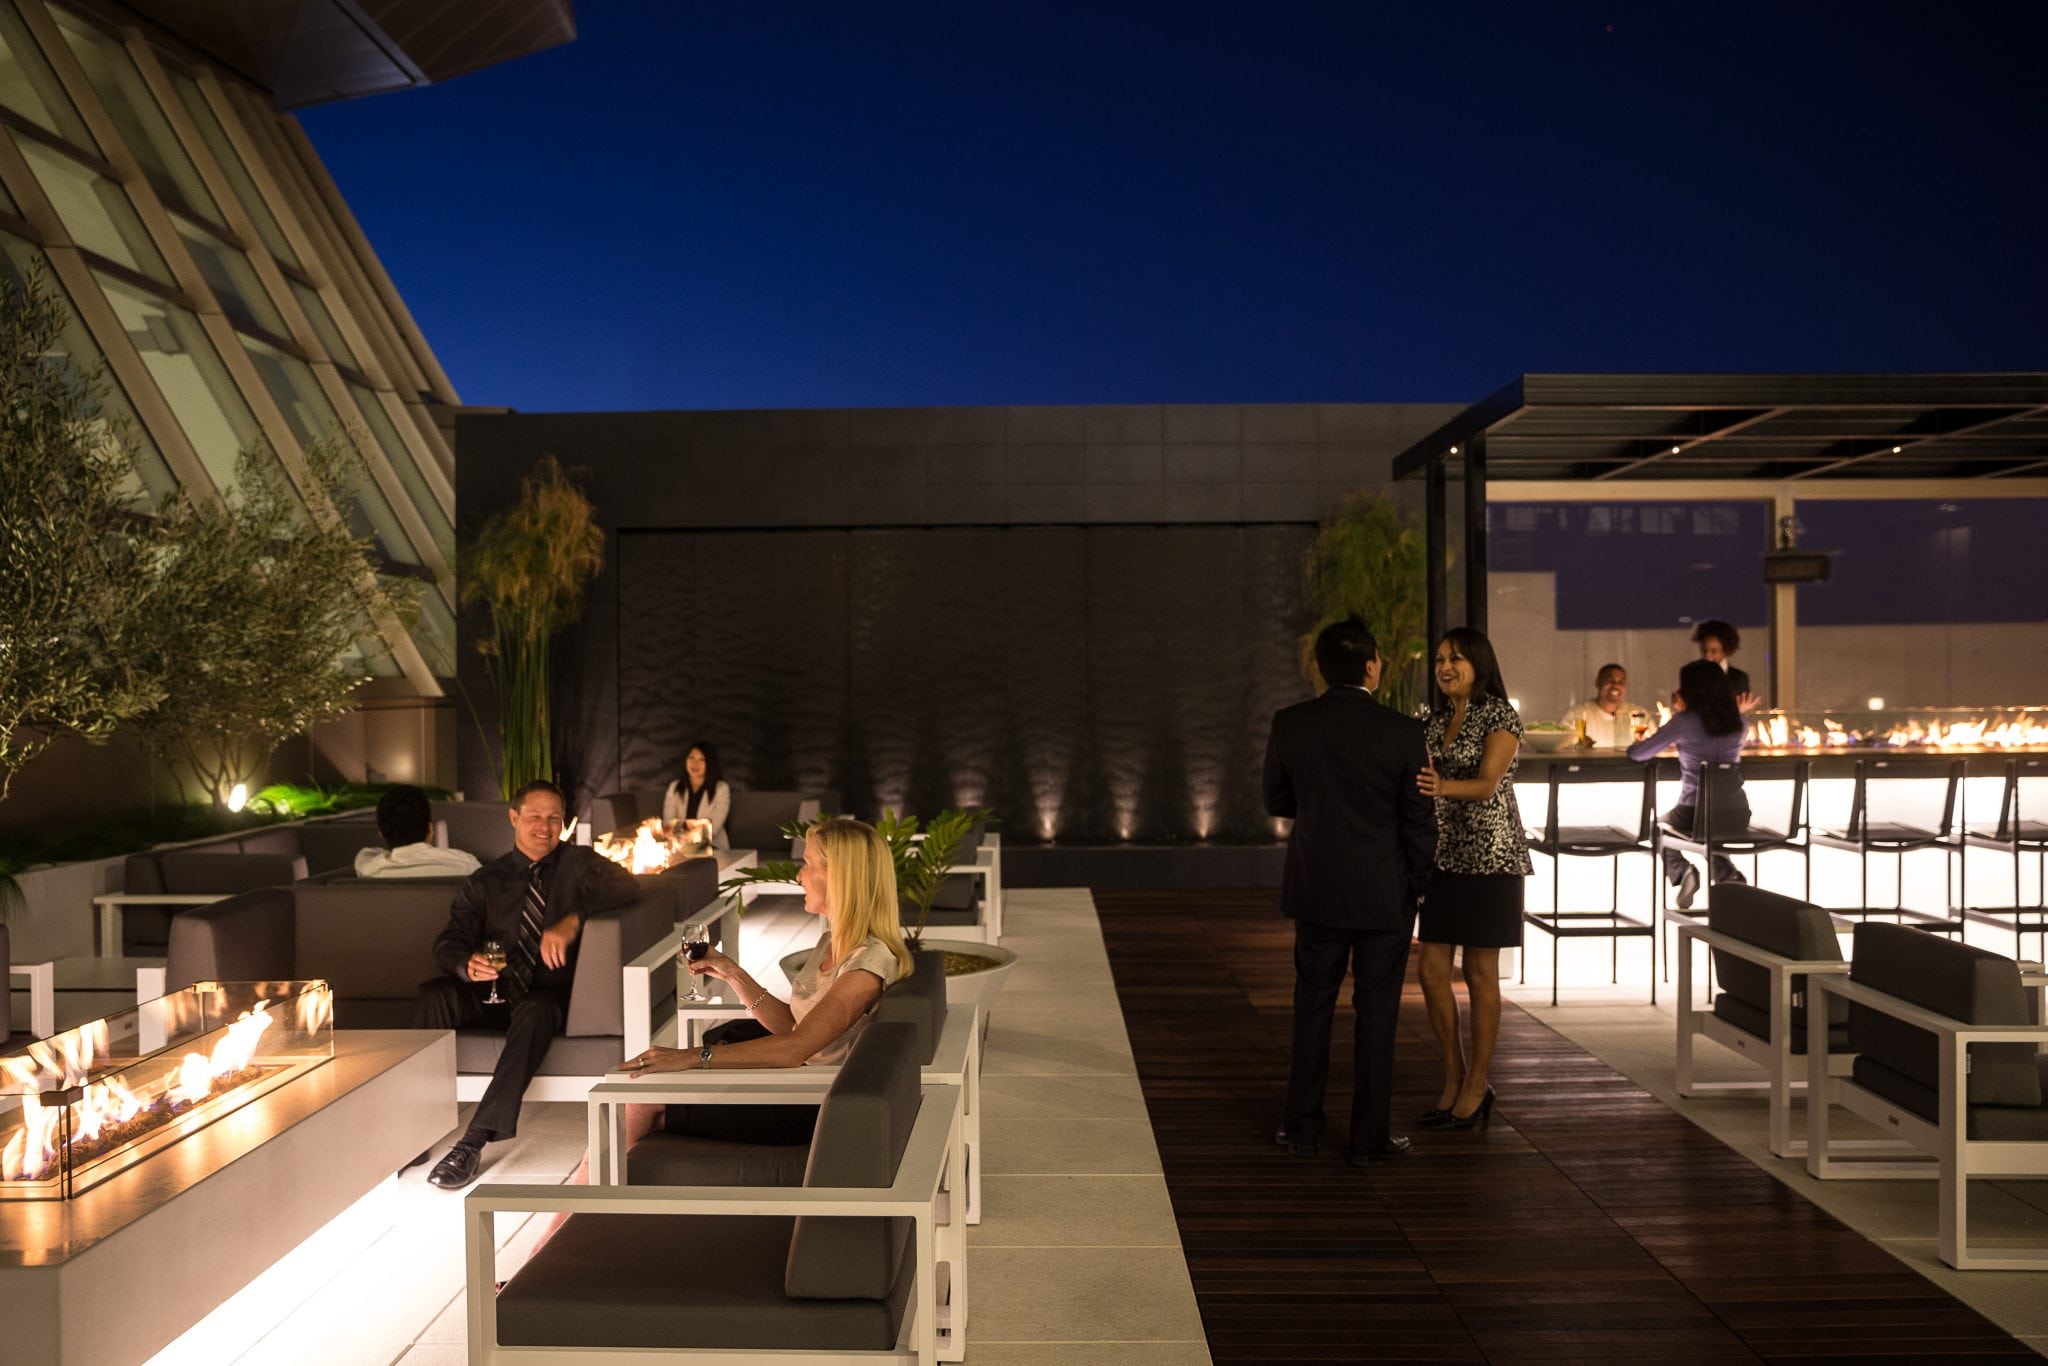 Passengers relax in the Air New Zealand LAX lounge and bar on the roof terrace. 